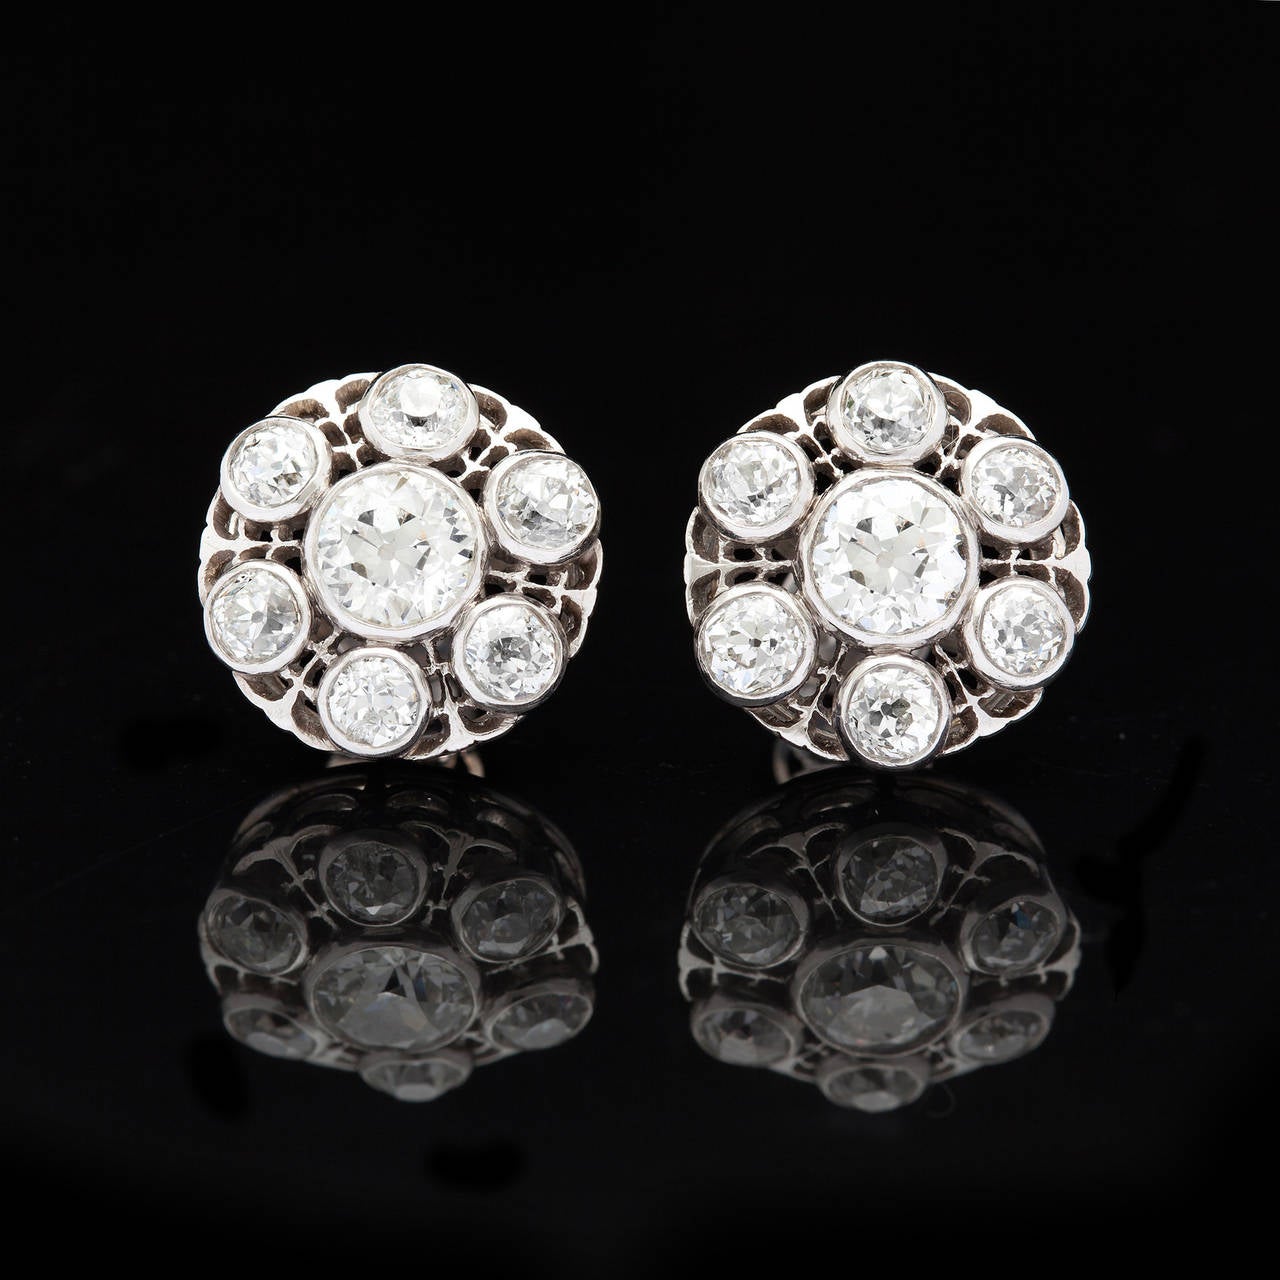 3.30 carats of Old European Cut Diamonds set in 18Kt White Gold from the Victorian Period. The earring measures 14.0 mm in diameter and weighs 7.6 grams total.